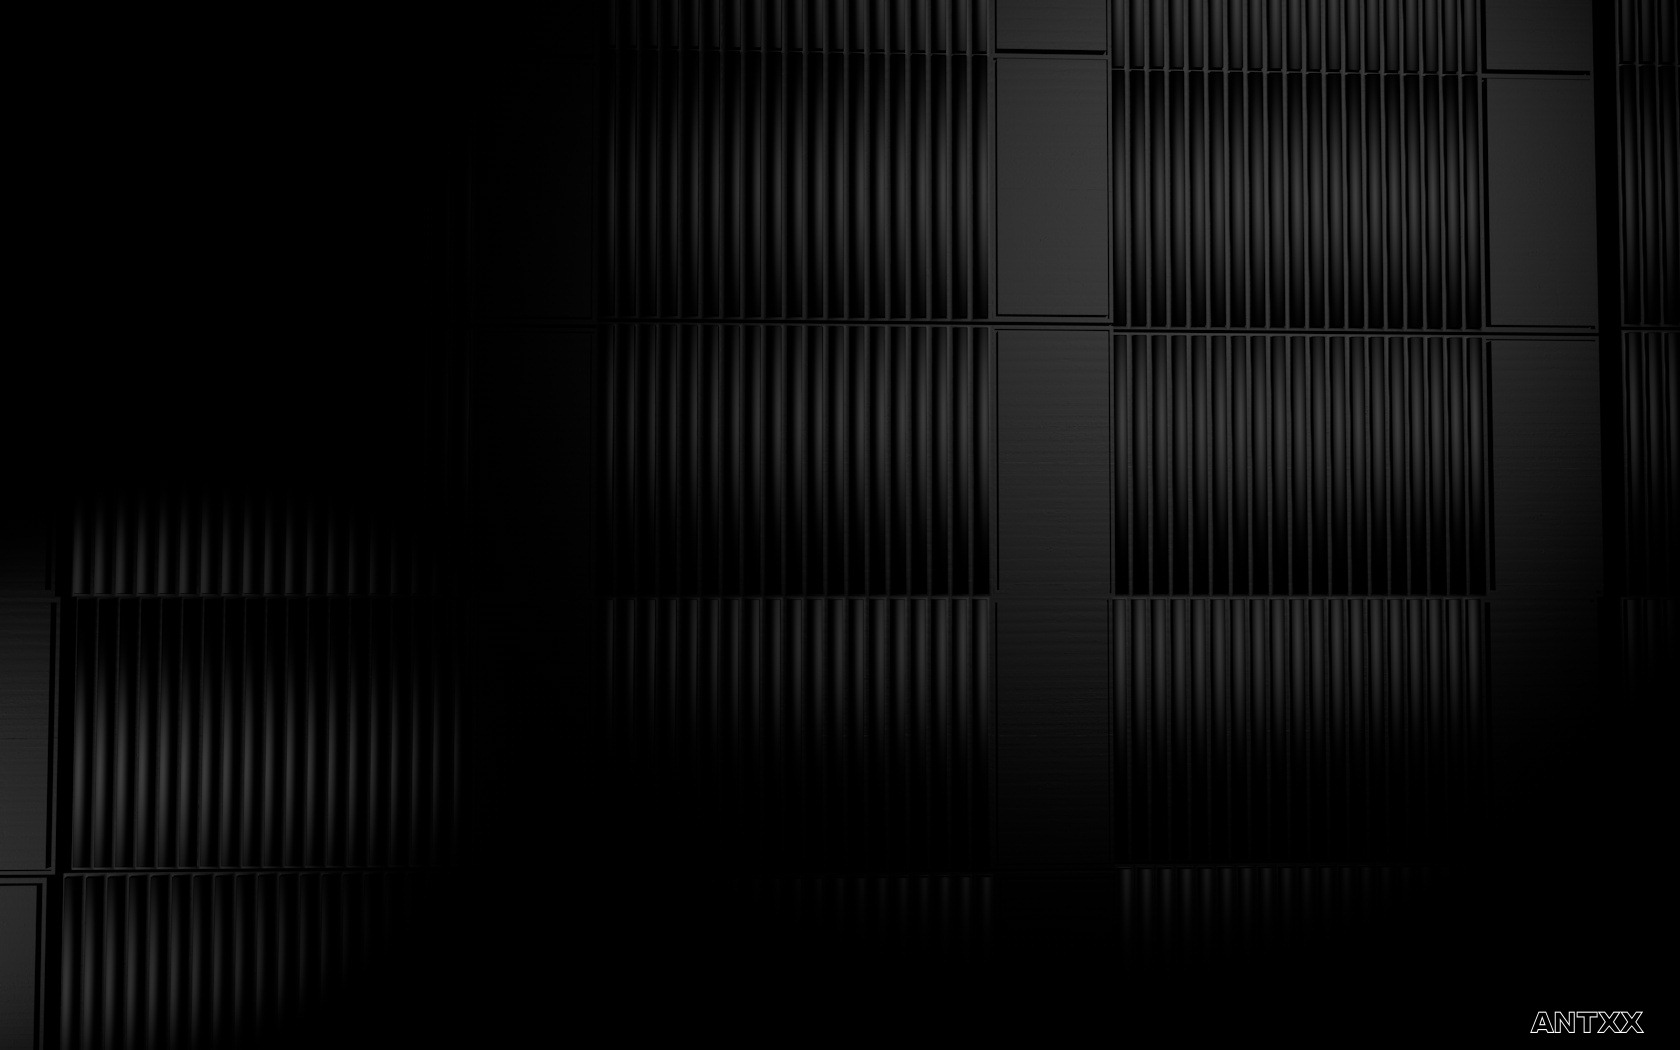 Made In Cinema 4d Just Black Cubes To Have A Nice Calm Background